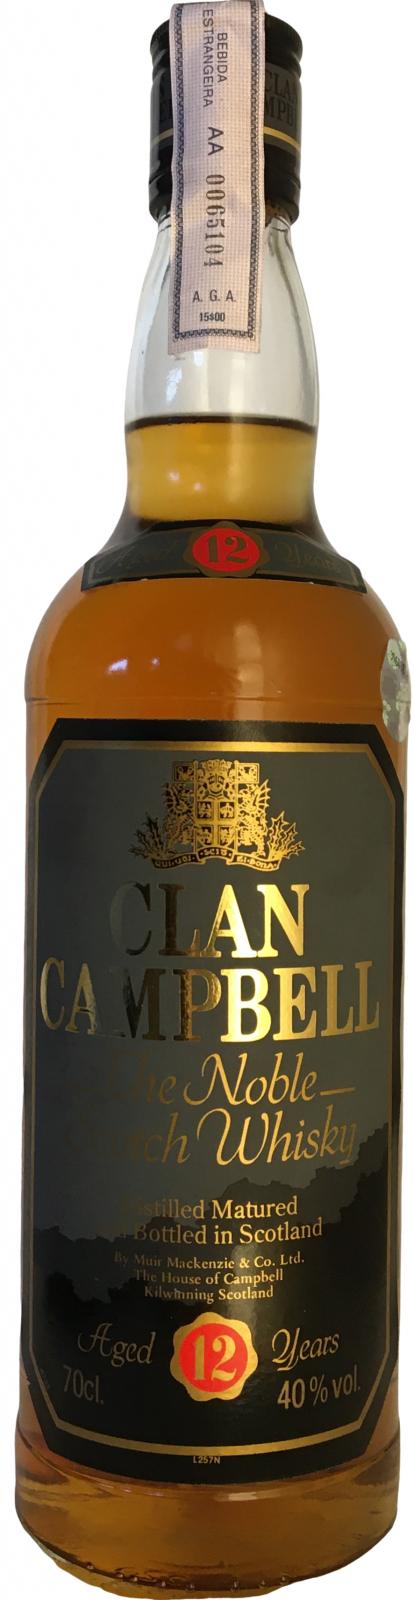 Clan Campbell 12-year-old